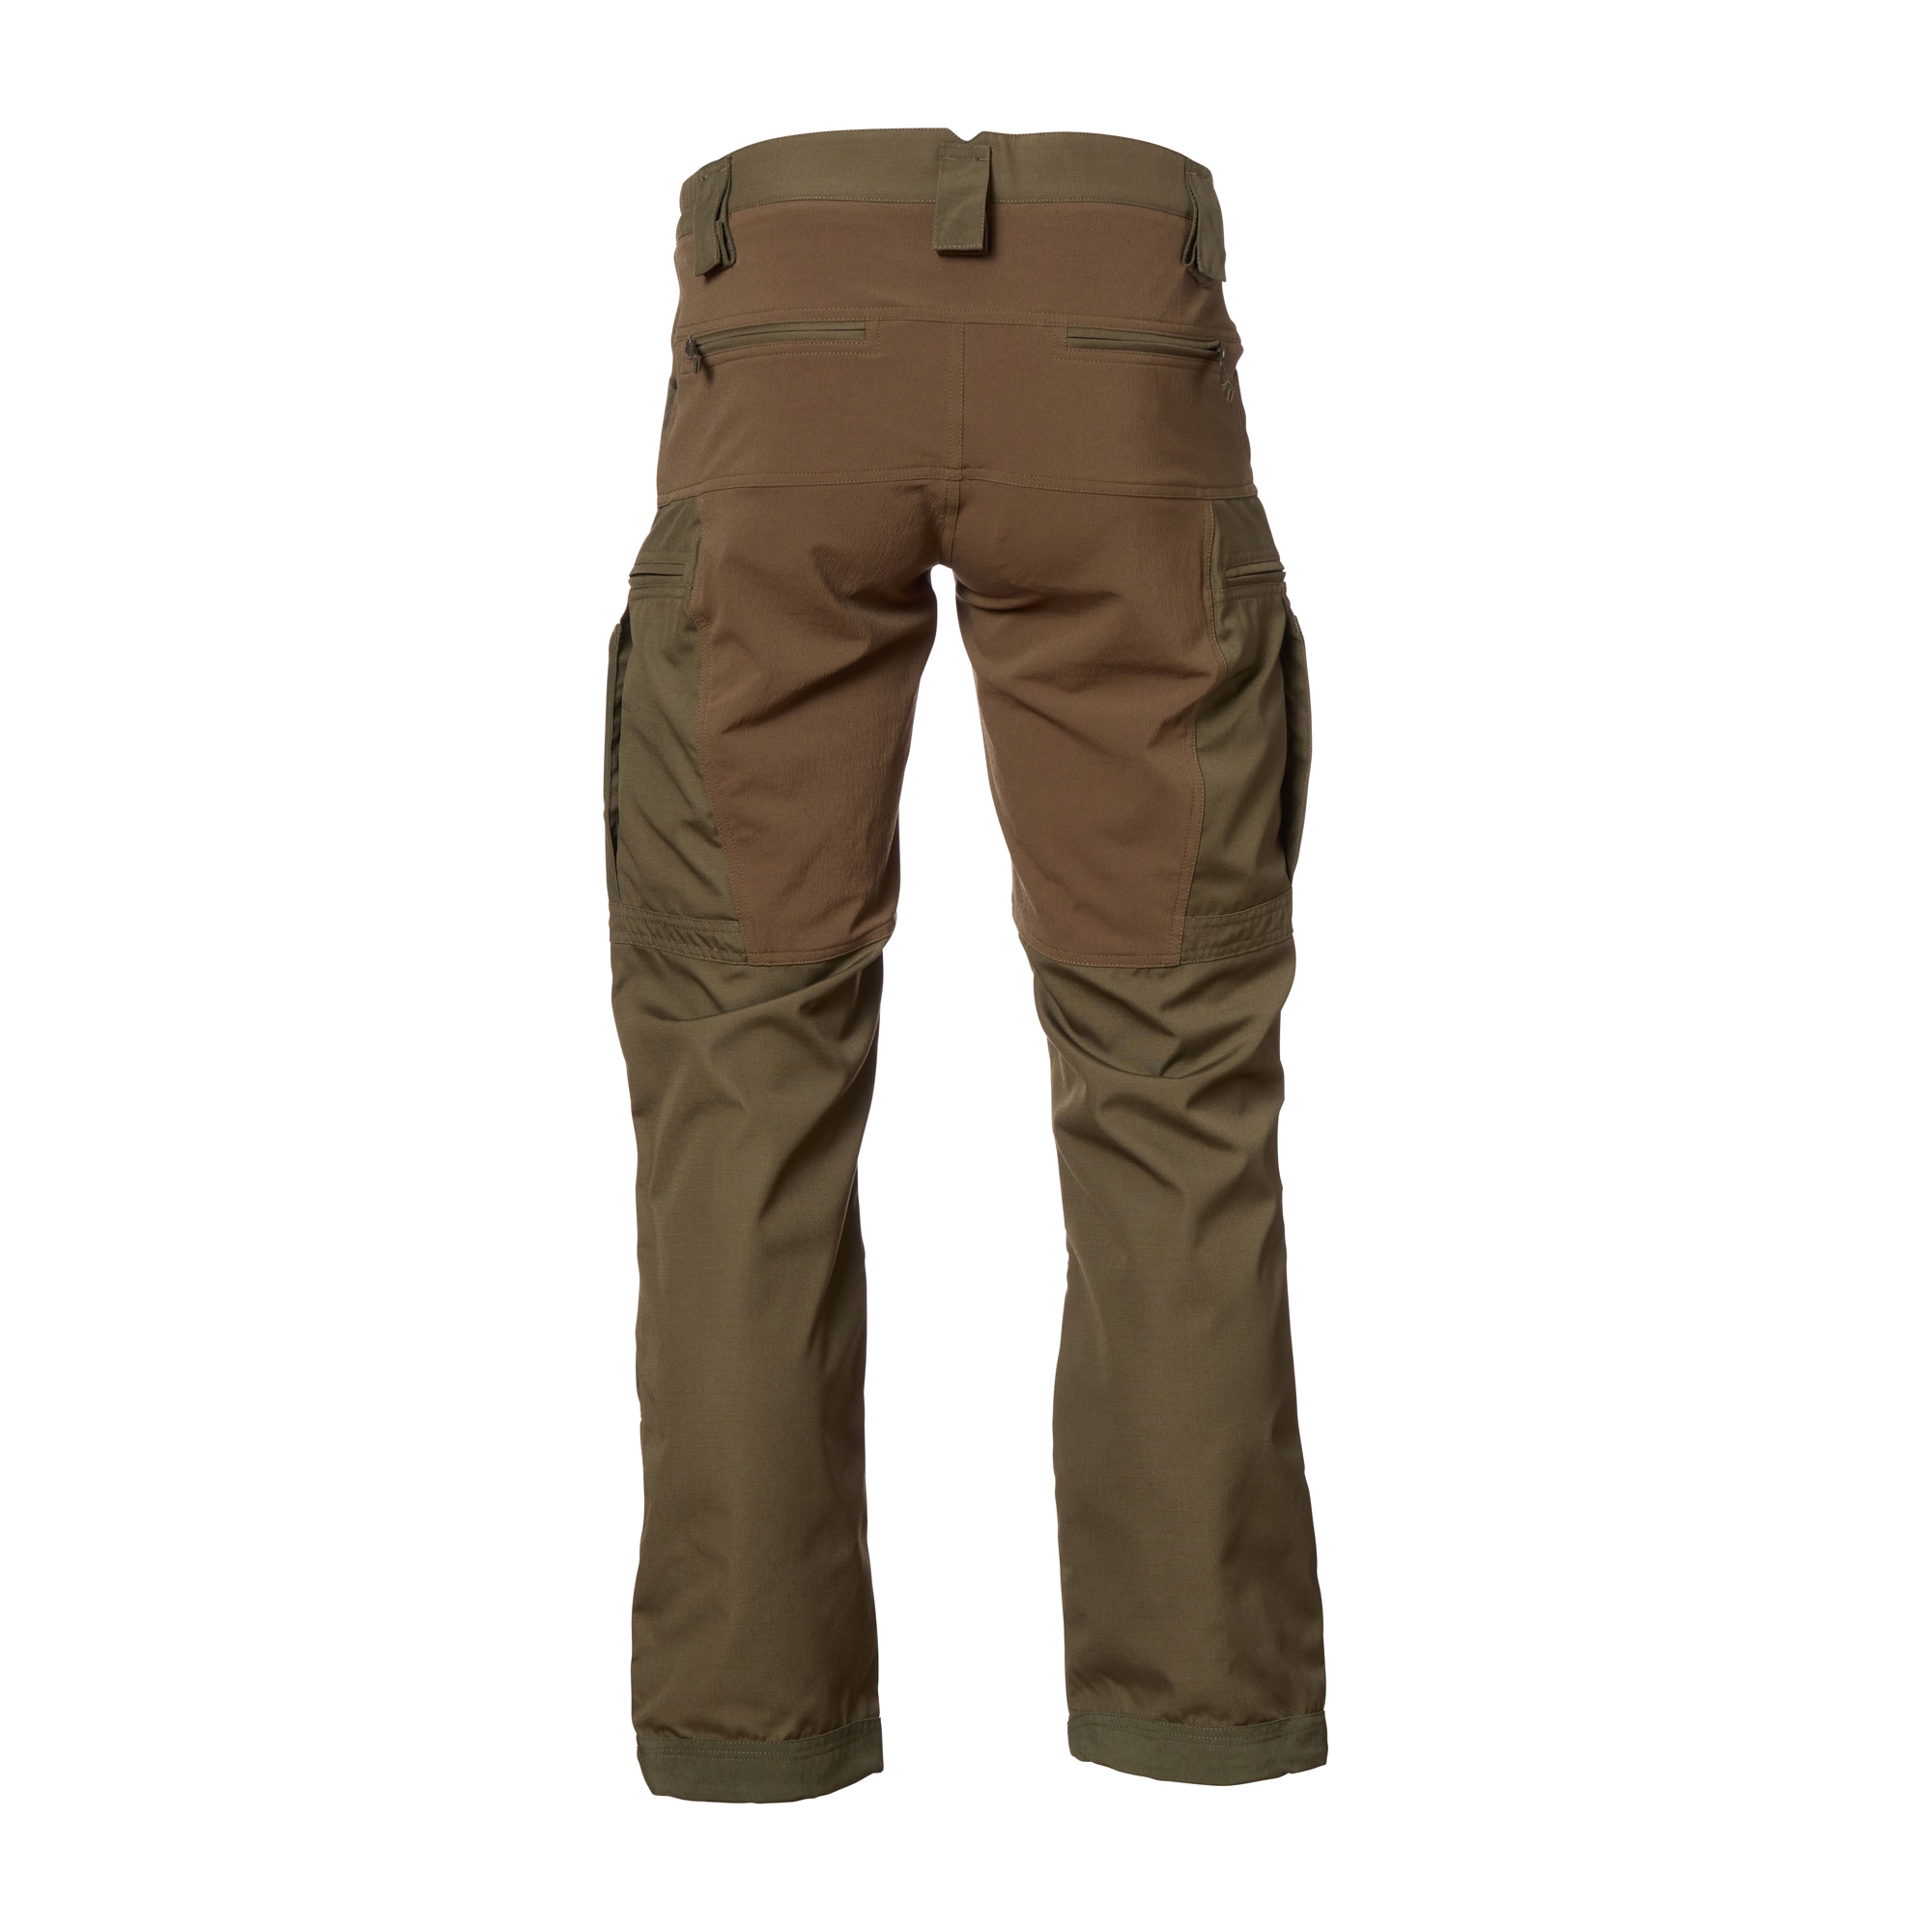 Purchase the UF Pro P-40 All-Terrain Gen. 2 Tactical Pants brown